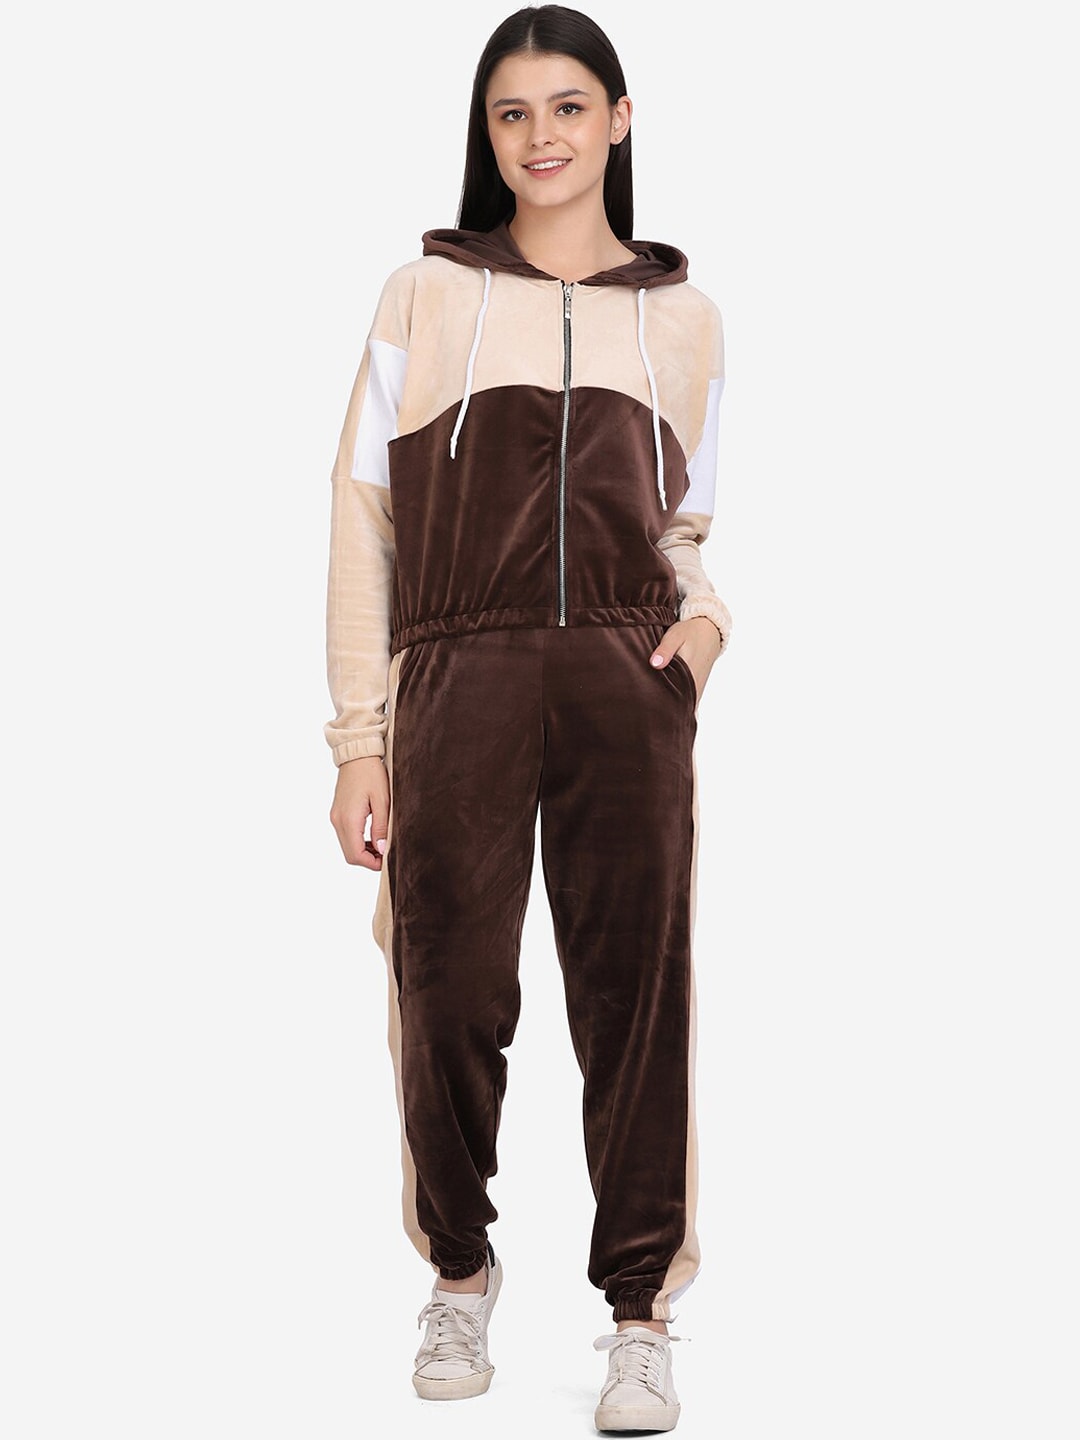 Aesthetic Bodies Women Brown & Beige Colorblocked Tracksuit Price in India